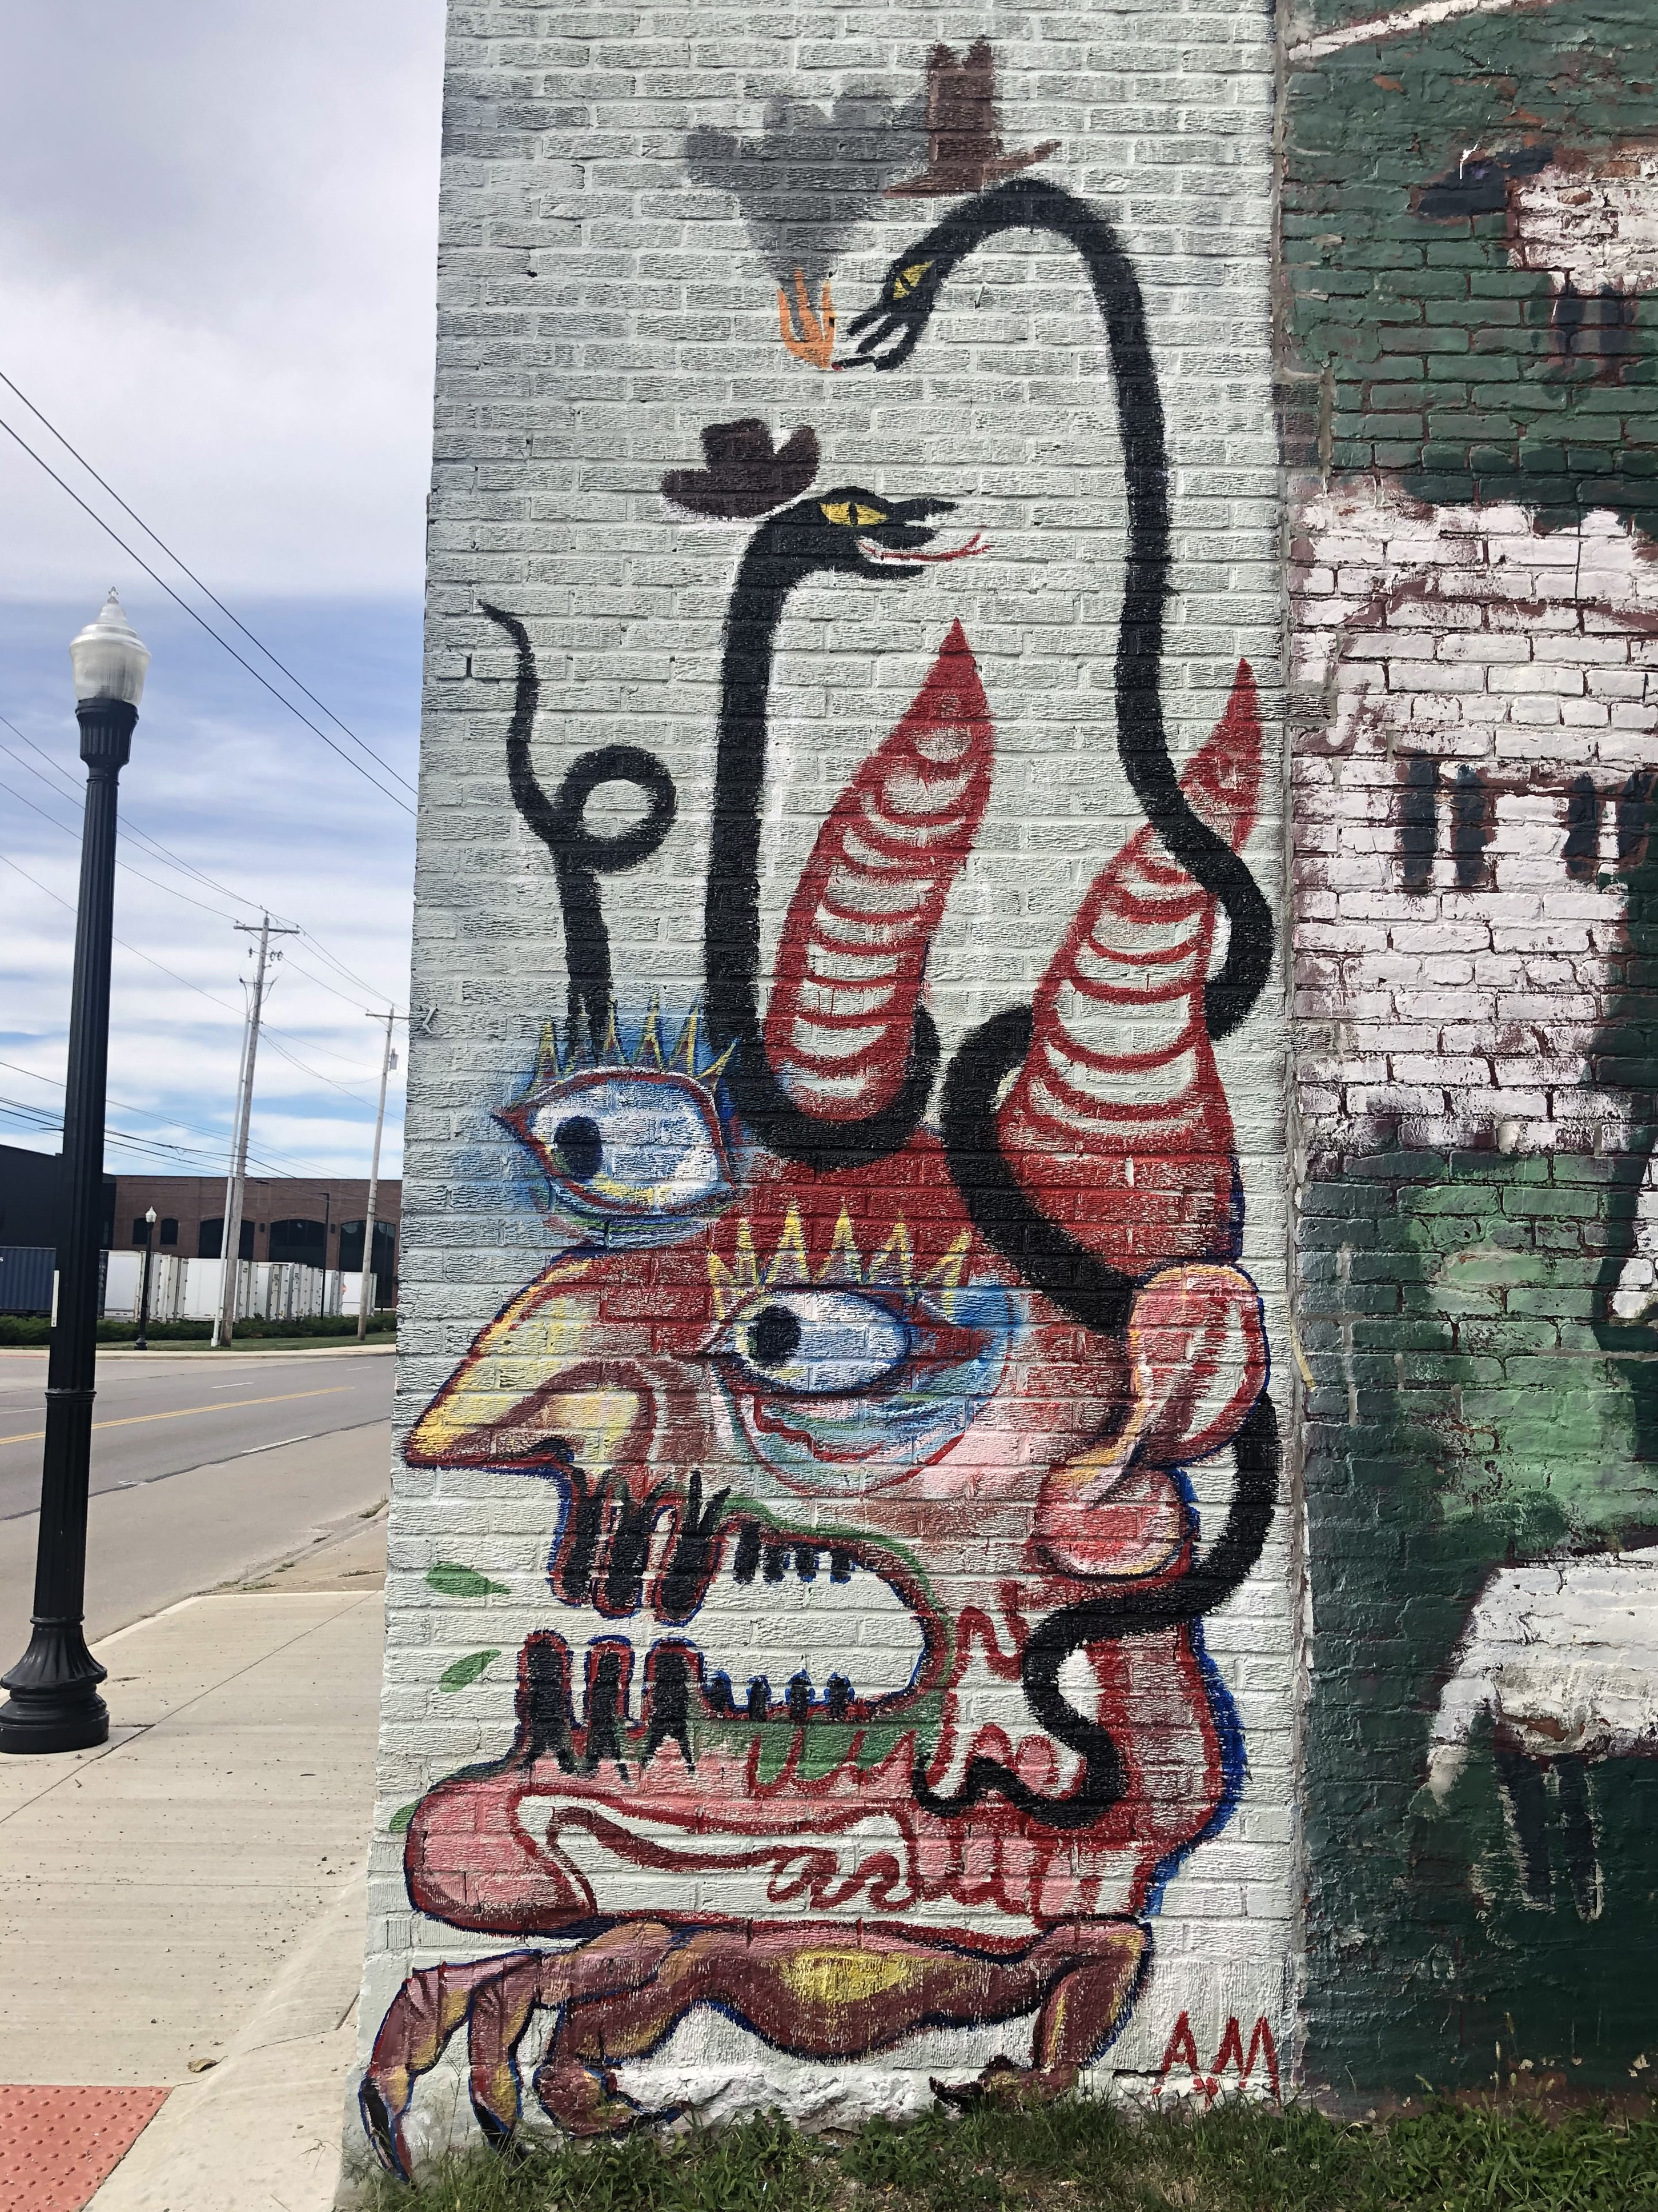 "Snakes with Hats" (934 Outdoor Gallery)